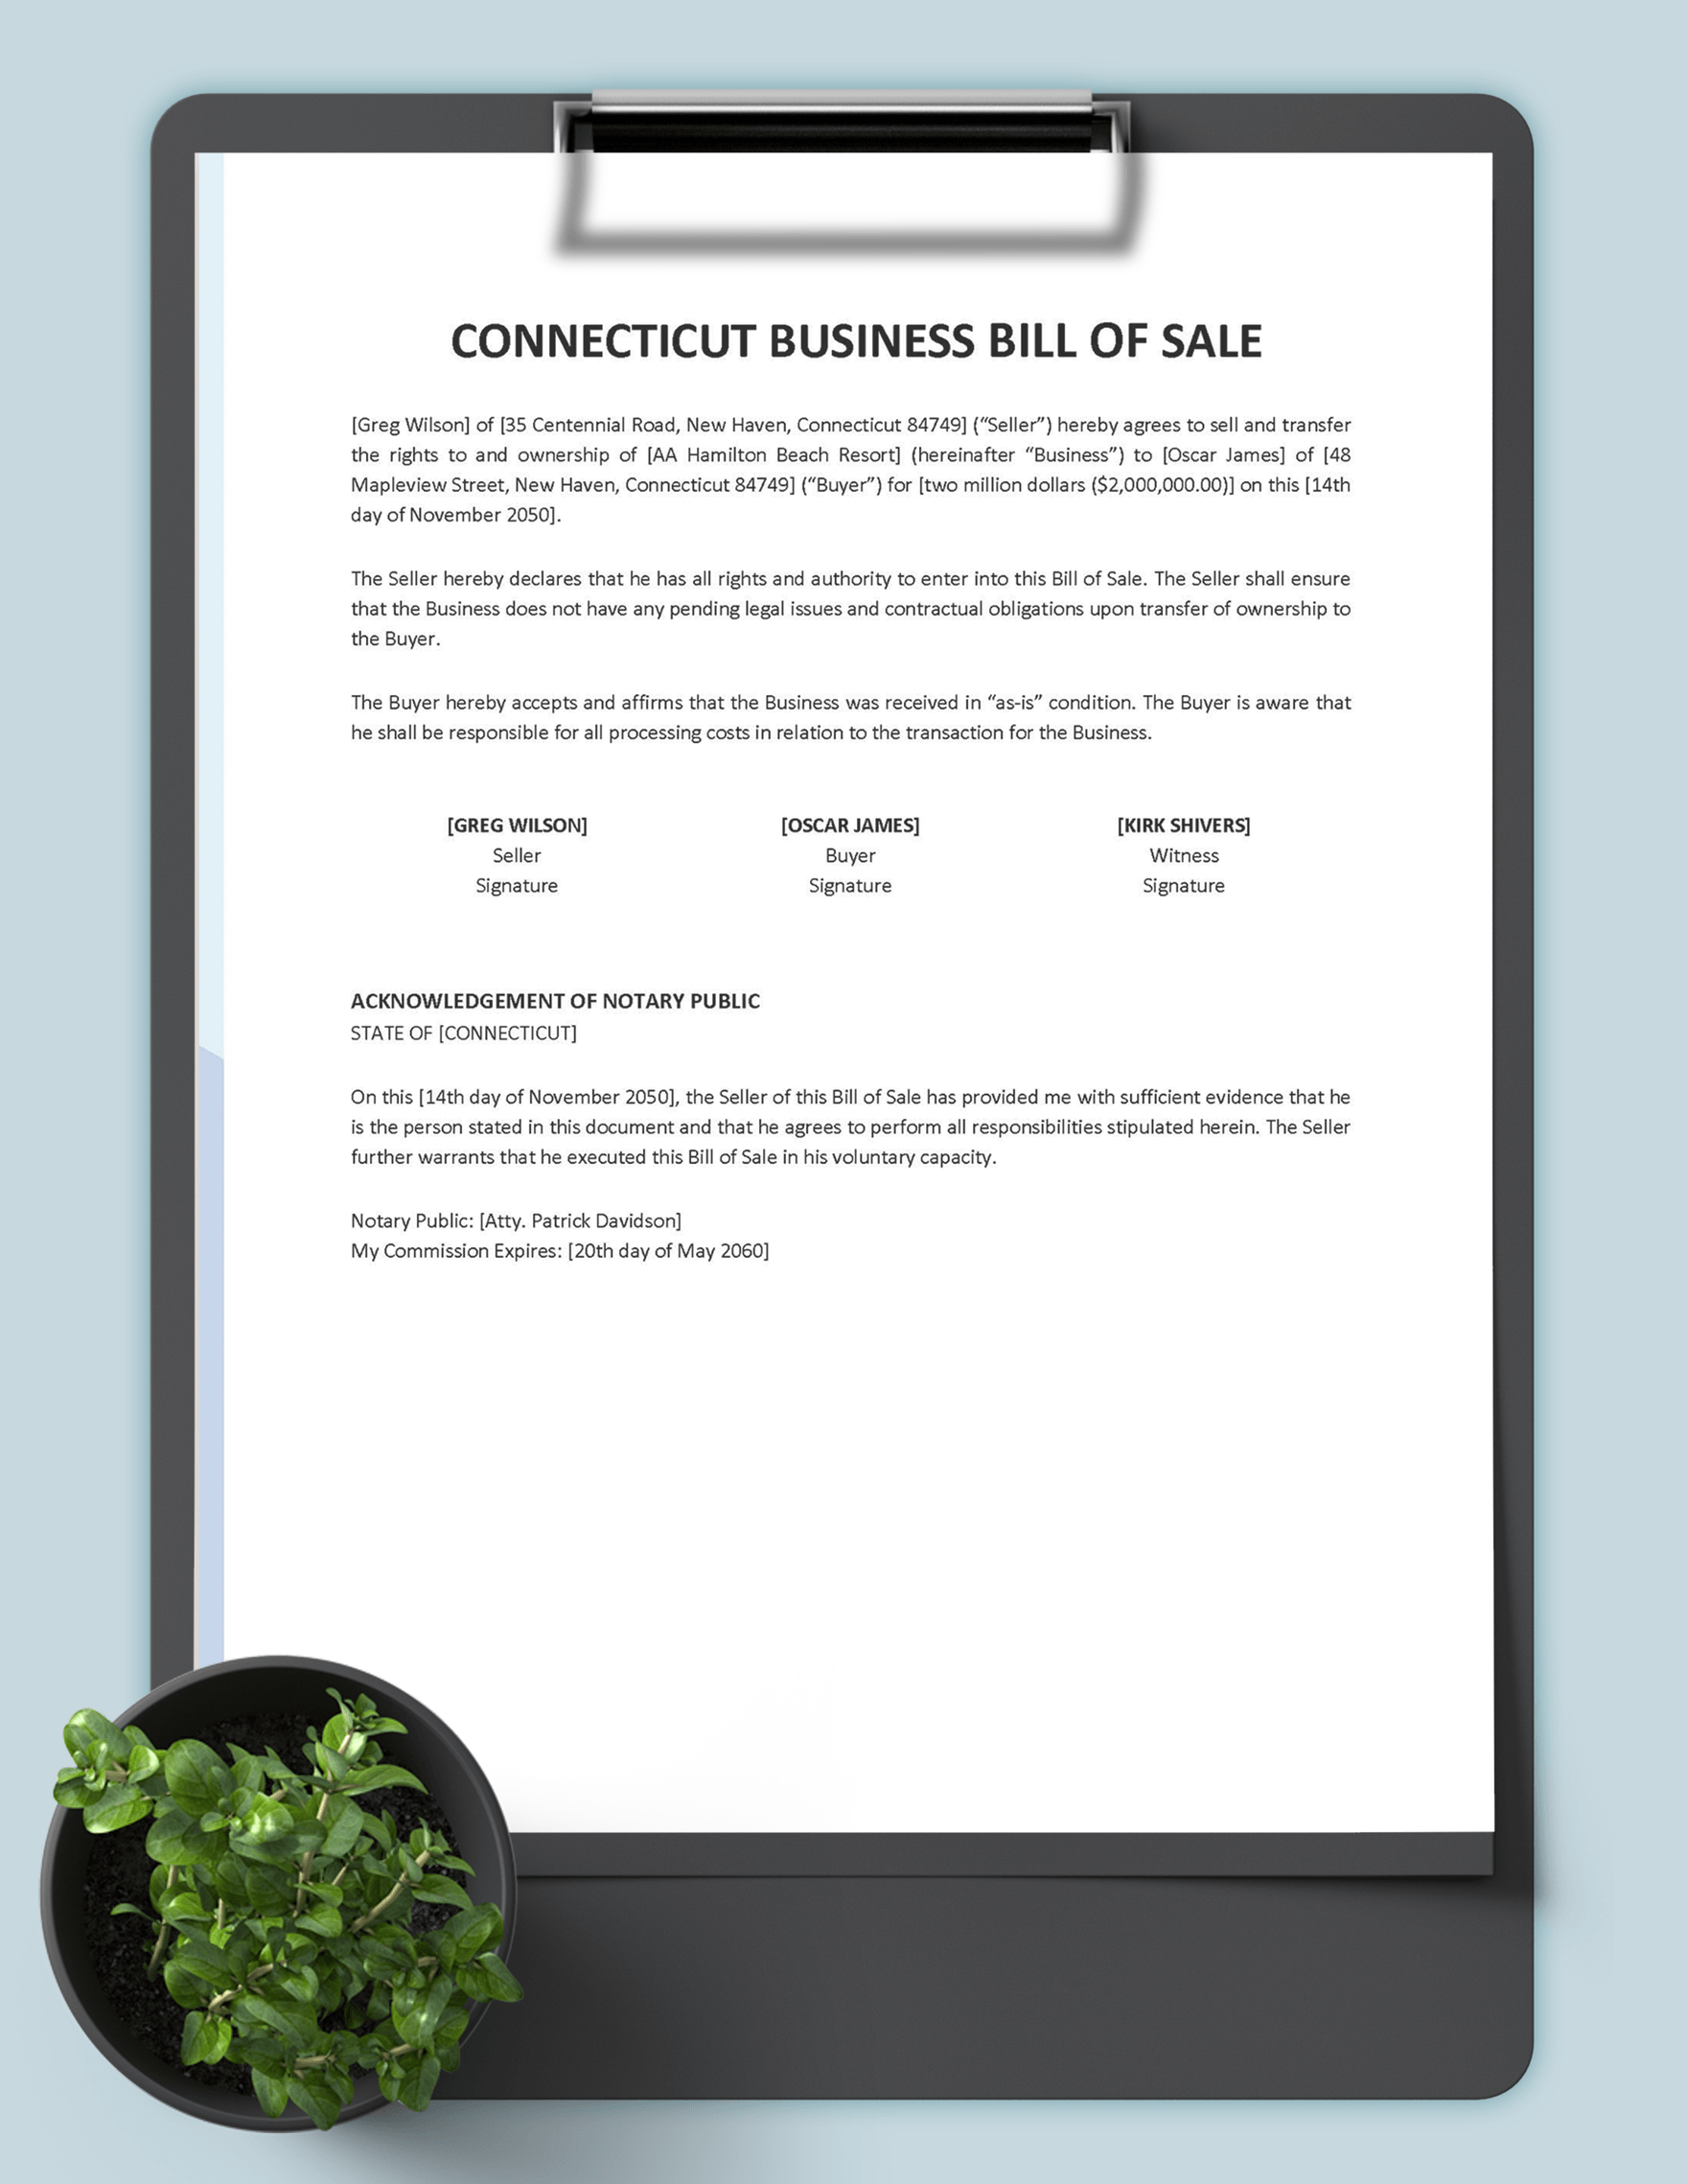 Connecticut Business Bill of Sale Template